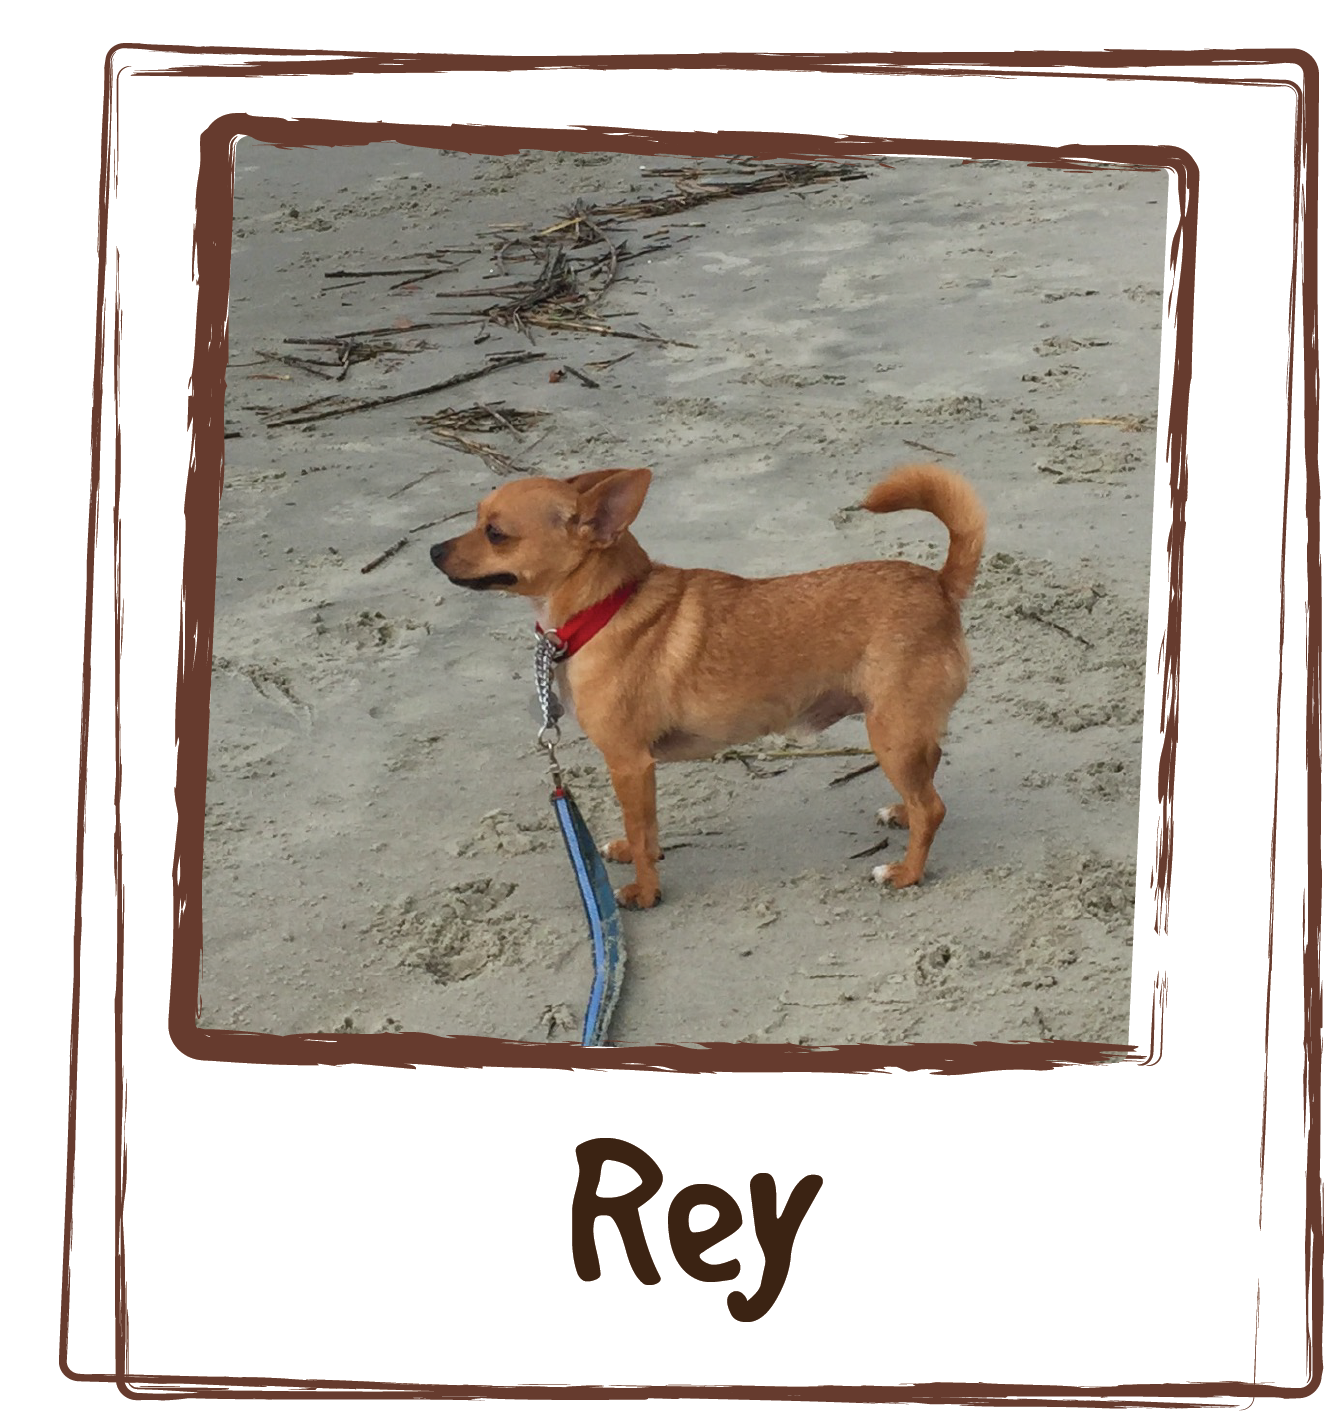  “Our little guy Rey, was really suffering with skin allergies and itching during the hot and humid summers here in South Carolina. We tried everything from over-the-counter allergy medication to prescription formulas. Nothing helped! Rey would chew 